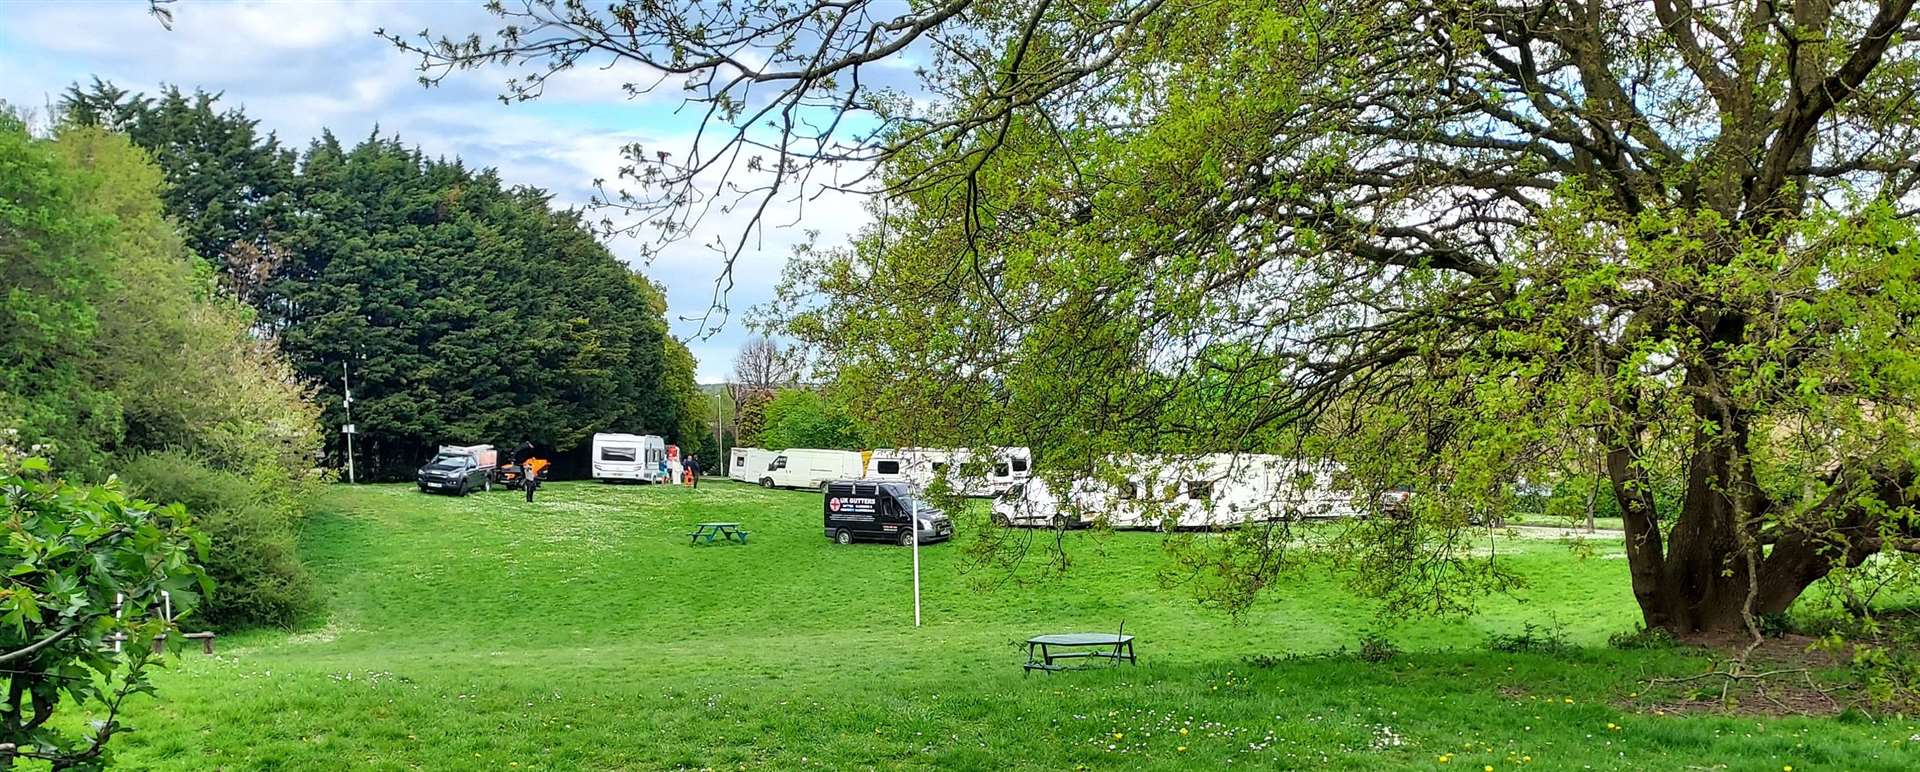 Caravans have been spotted parked up off Oxley Shaw Lane